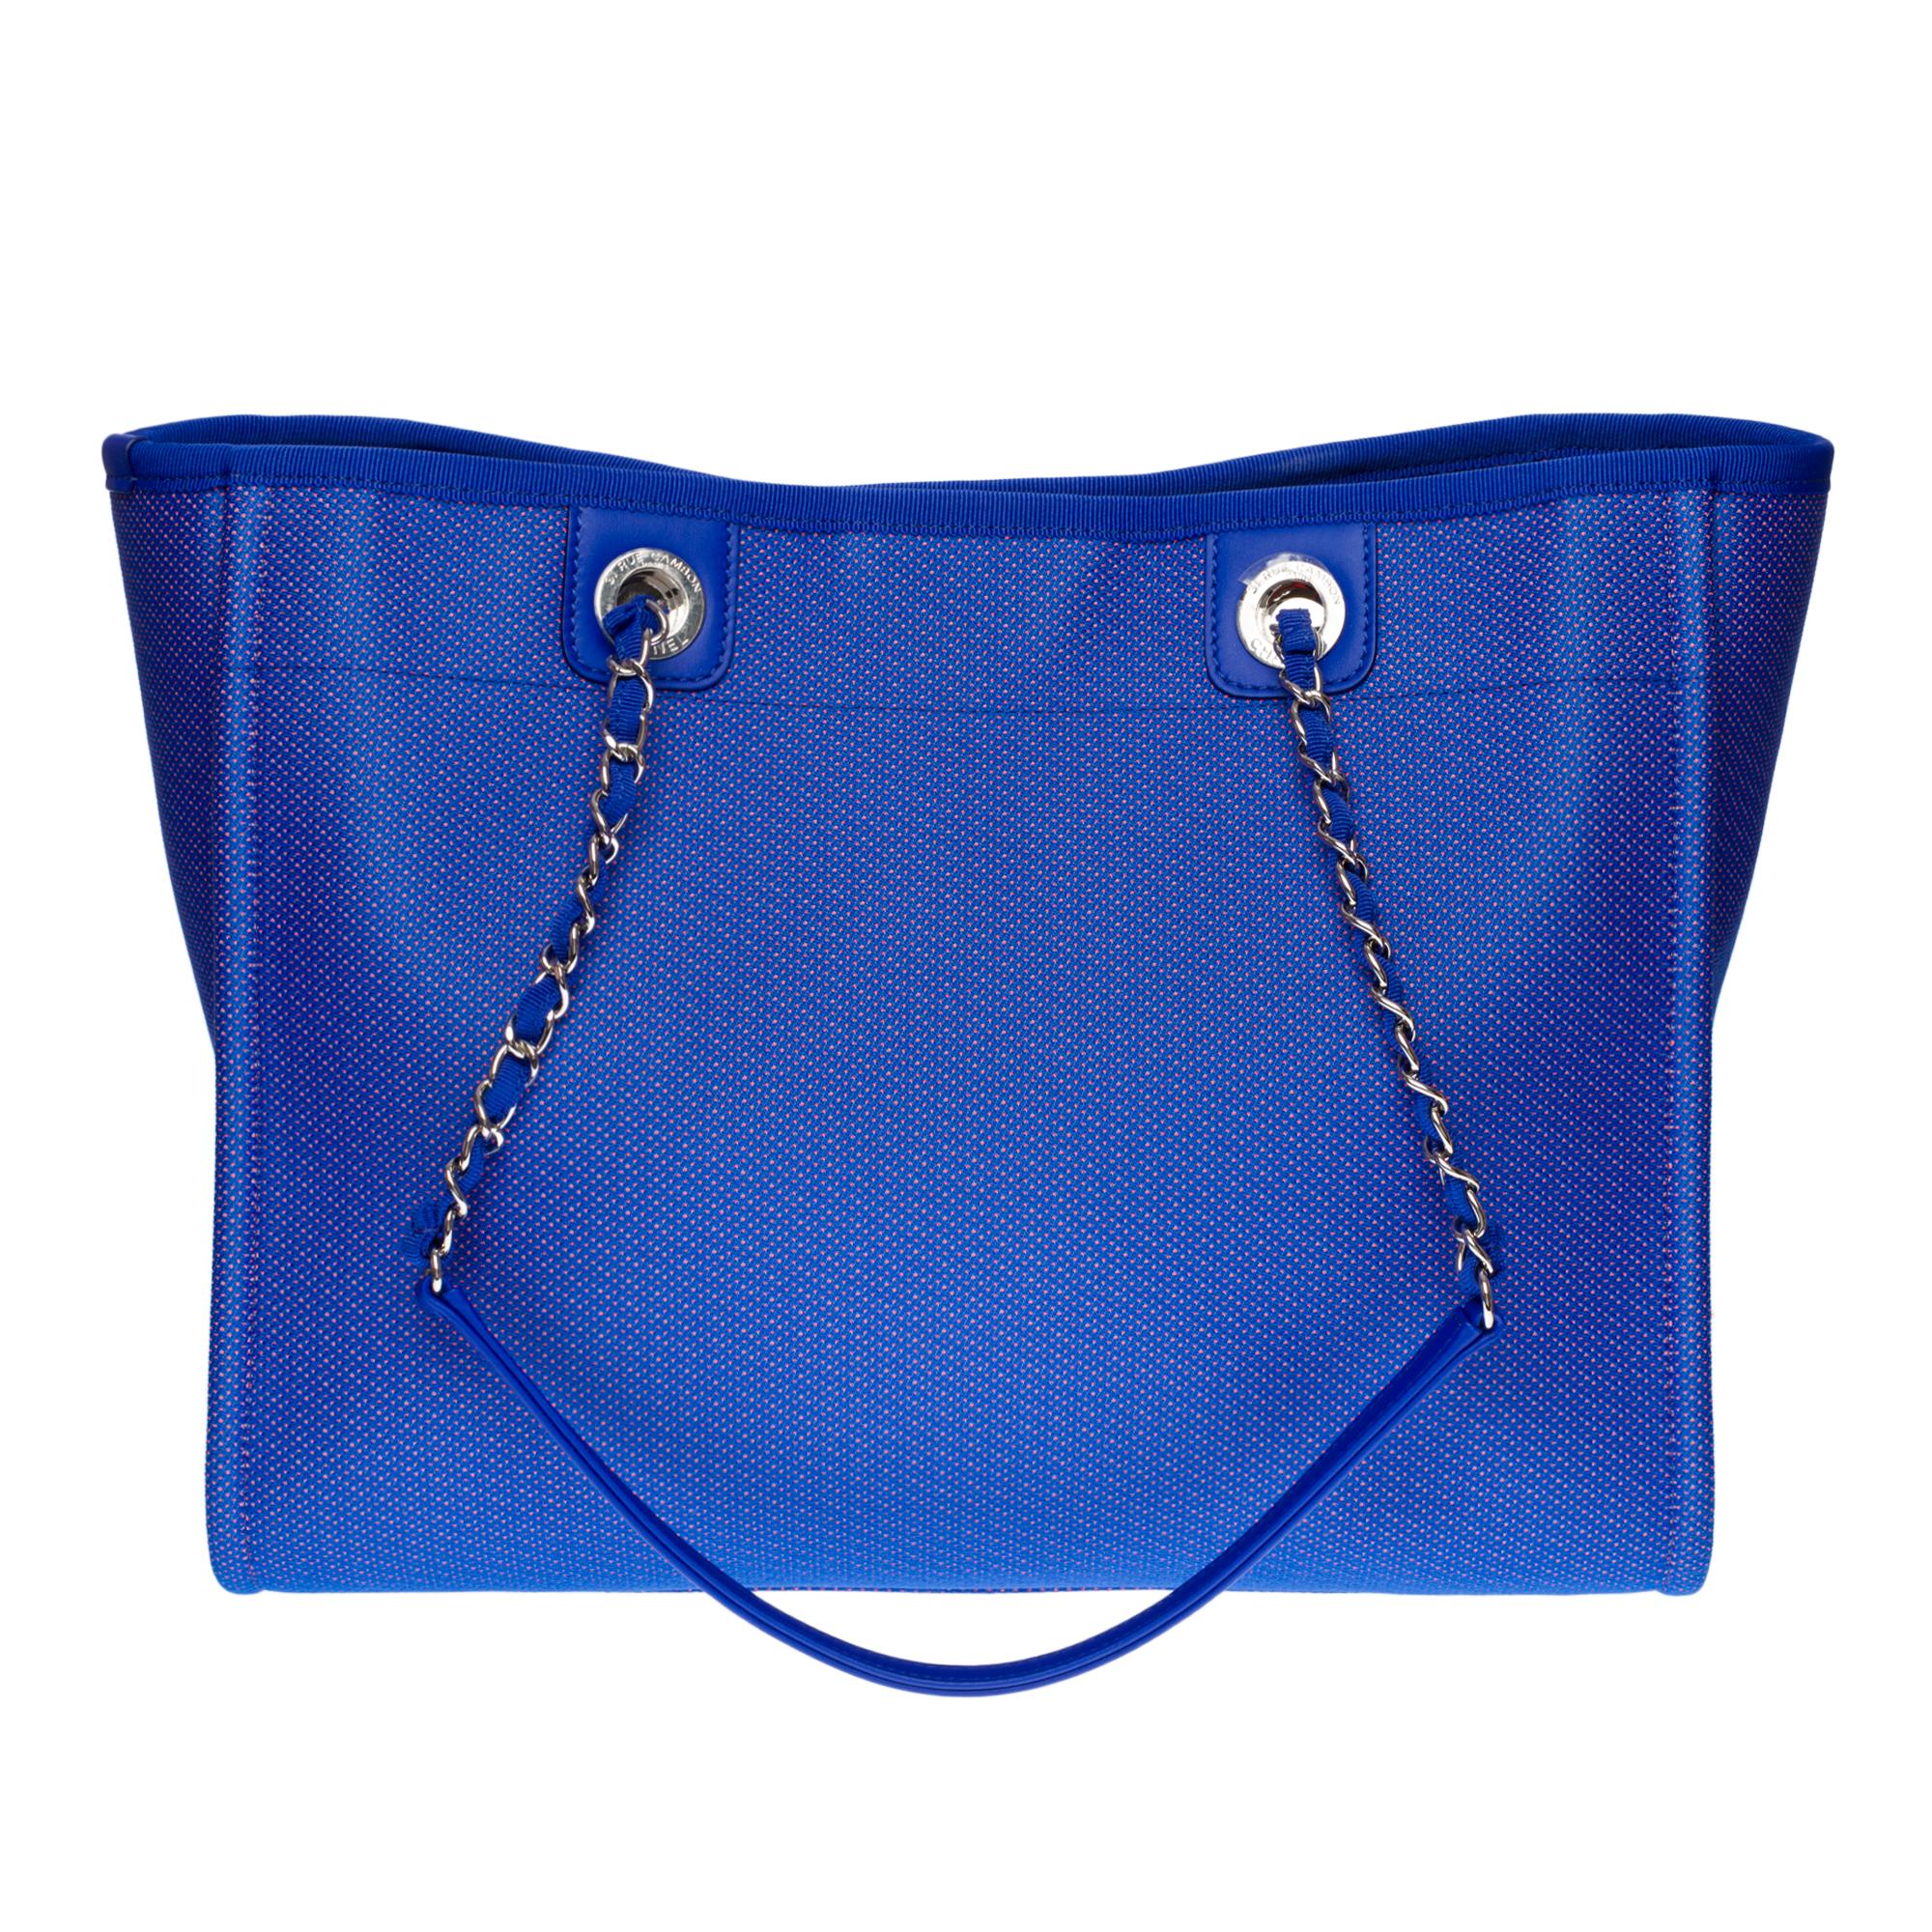 Beautiful Chanel Deauville Tote bag in electric blue canvas and orange Fluo, silver metal hardware, a double handle in silver metal interlaced with electric blue canvas allowing a hand and shoulder support

Closure by double silver magnet
Neon